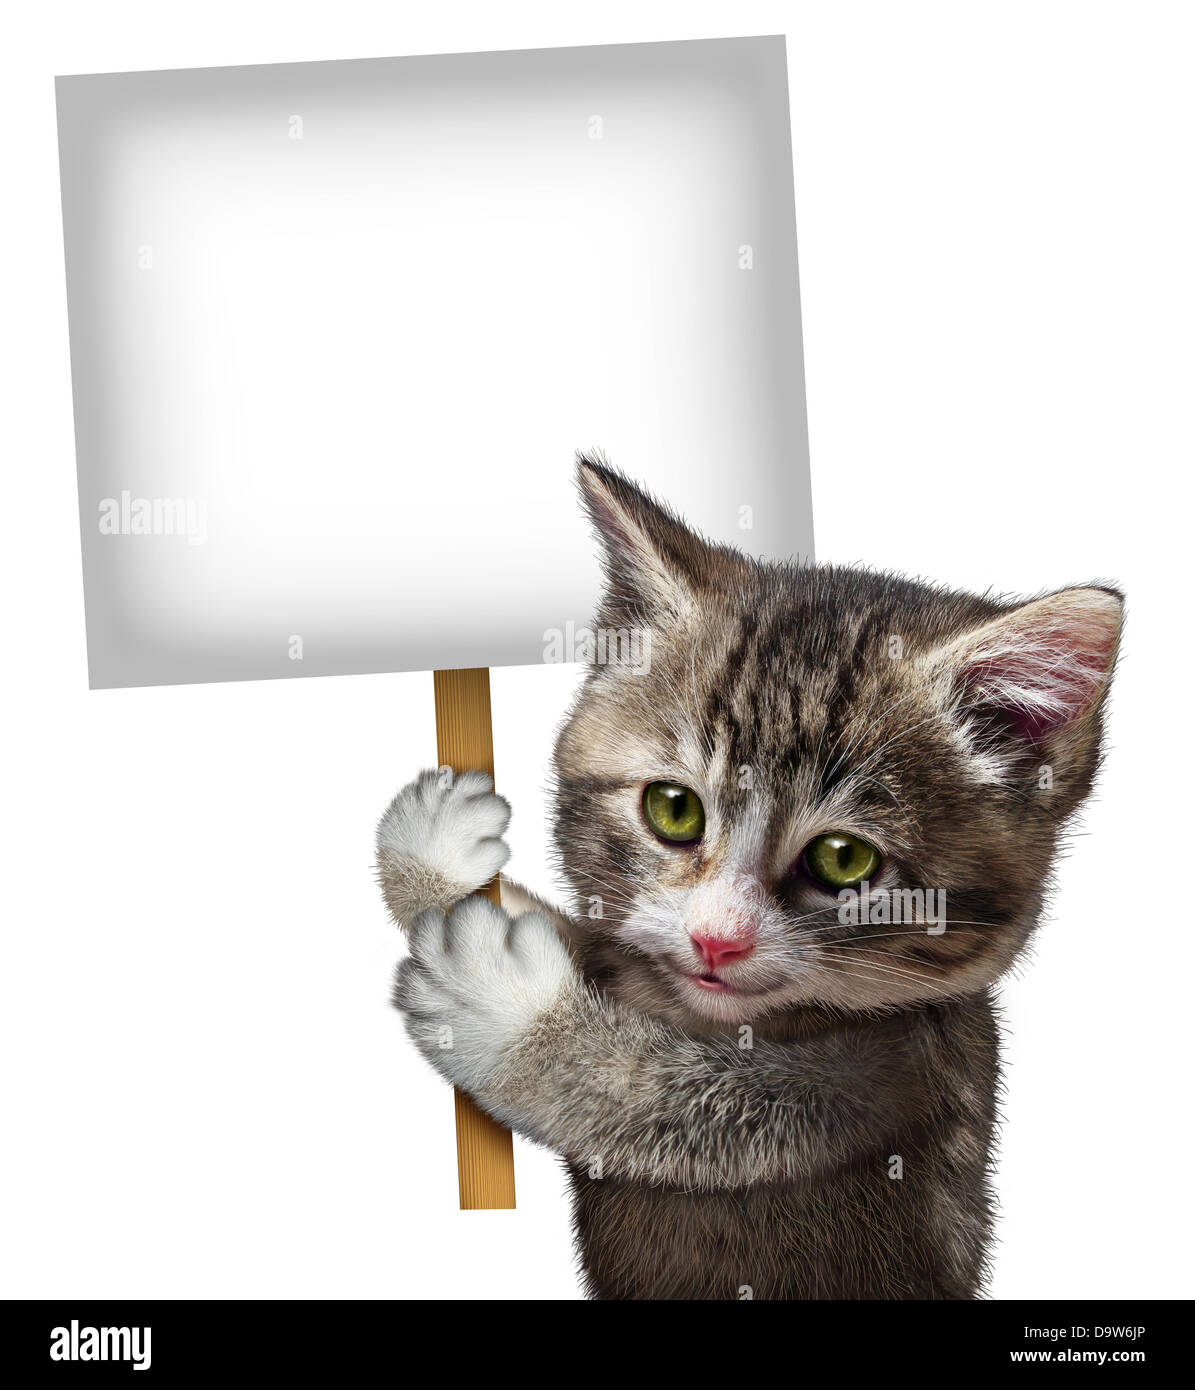 Cat holding a blank card sign as a cute kitten feline with a smiling happy expression supporting and communicating a message pertaining to pet care on an isolated white background. Stock Photo